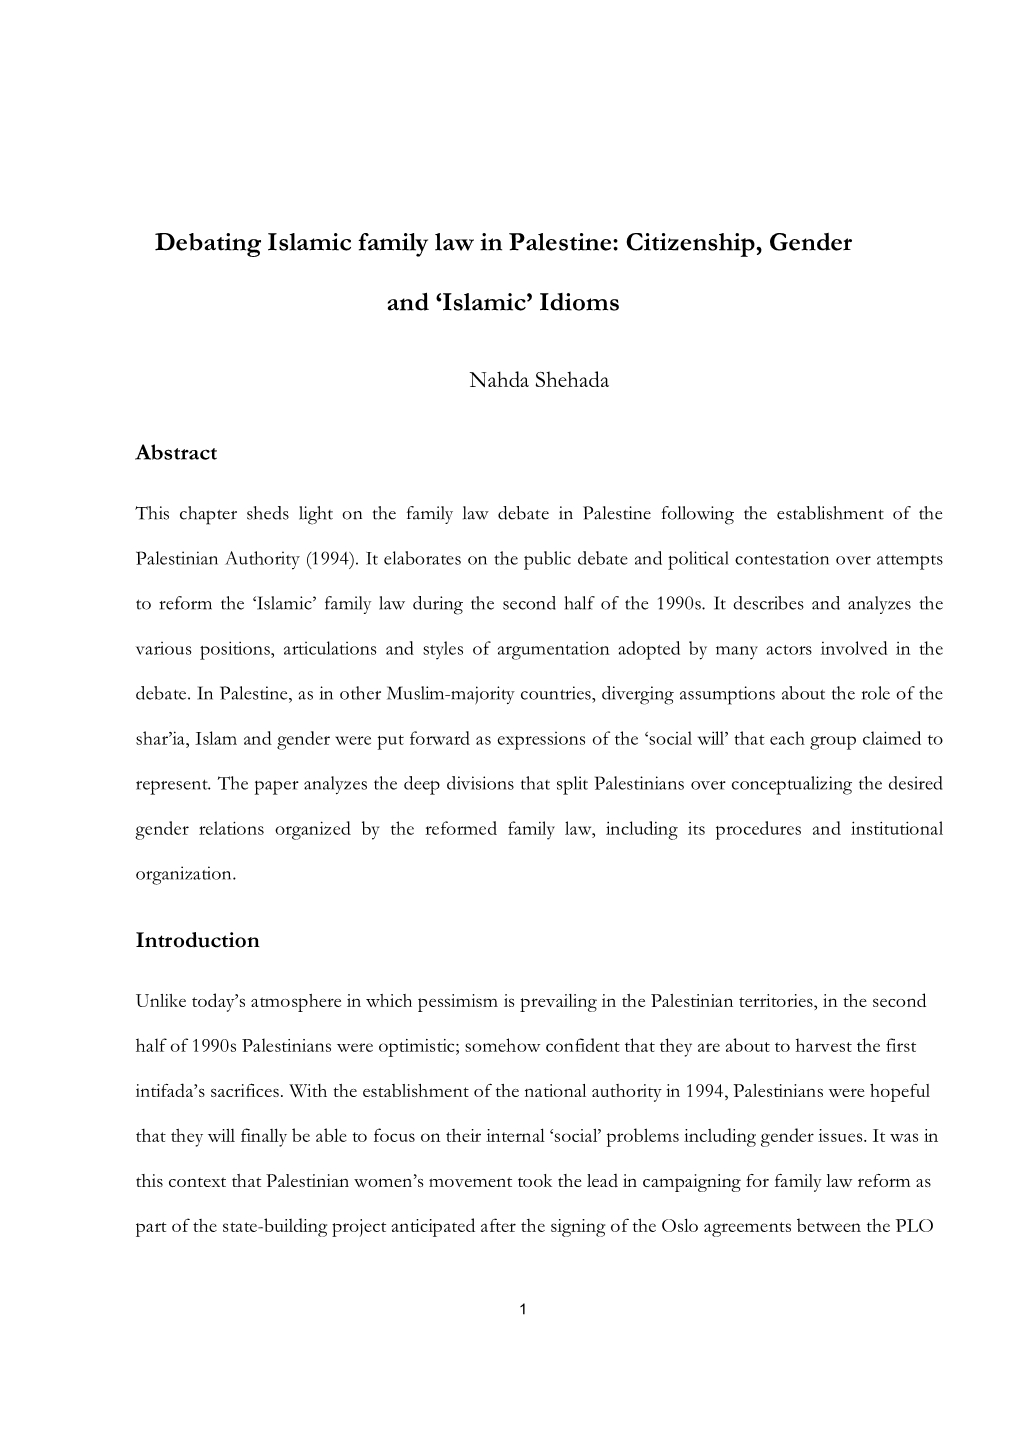 Debating Islamic Family Law in Palestine: Citizenship, Gender And